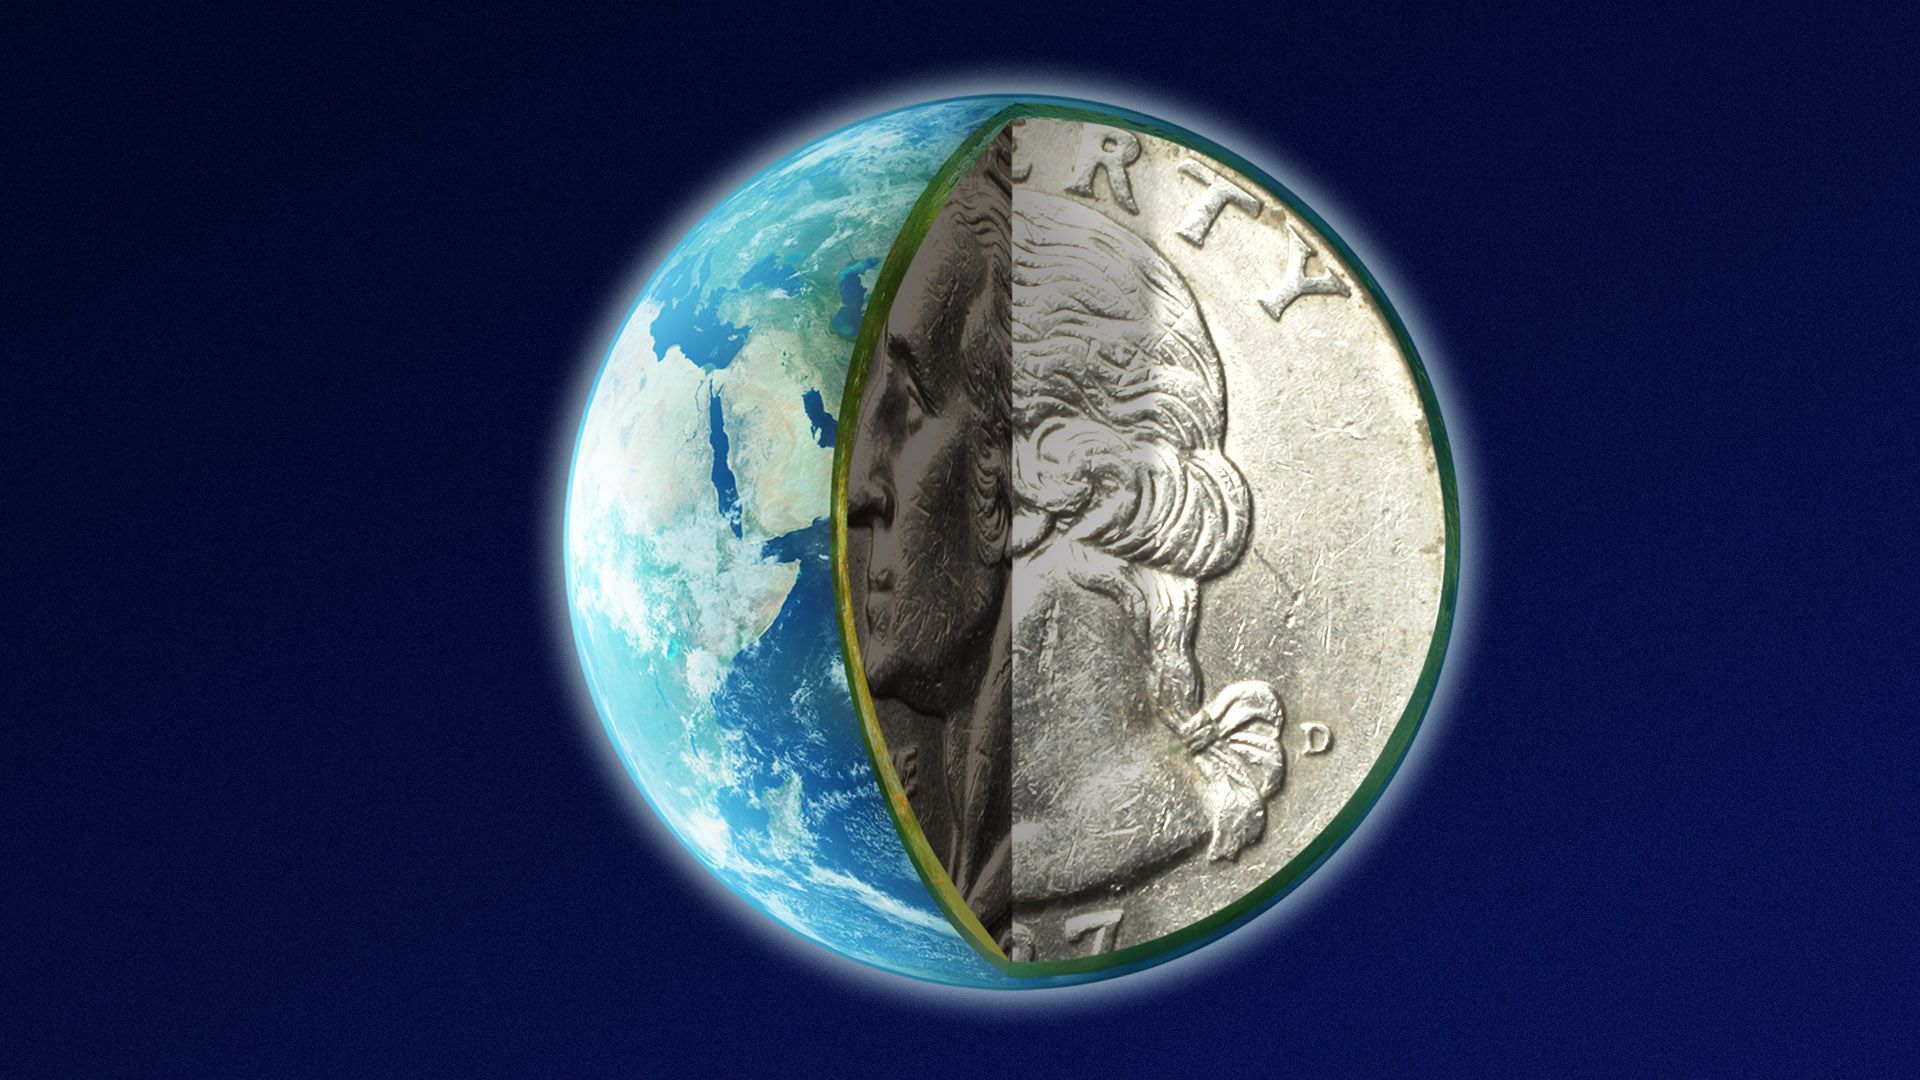 Illustration of the Earth with a cutaway revealing a quarter.